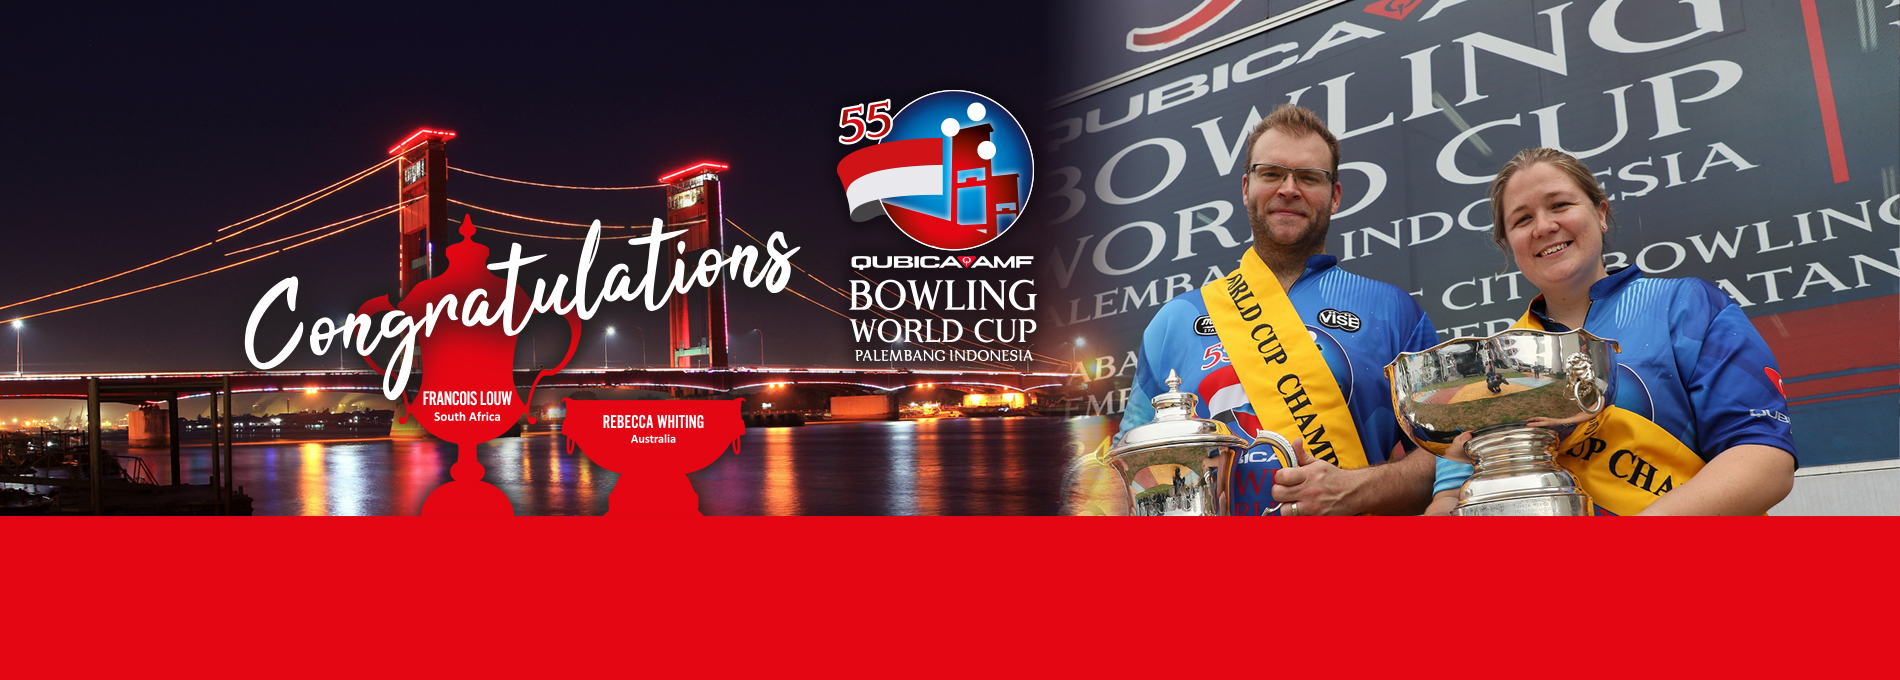 55th QubicaAMF Bowling World Cup winners Congratulations